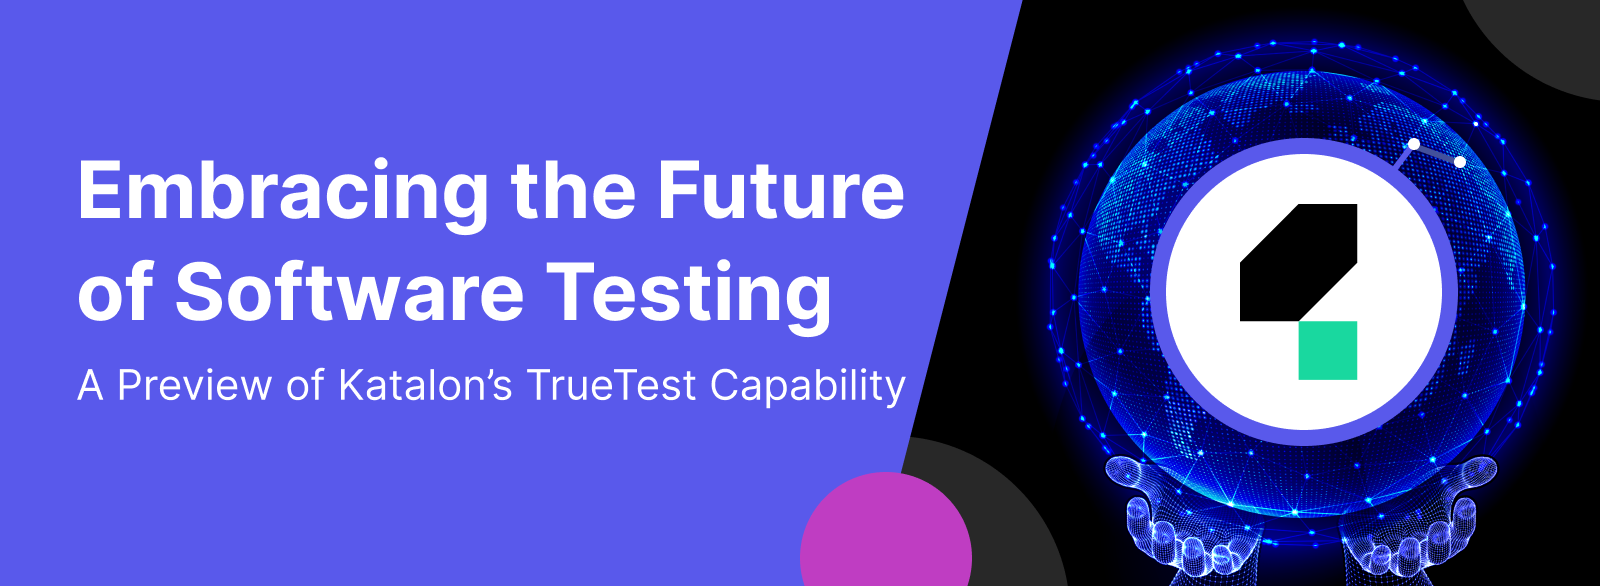 Embracing the Future of Software Testing: A Preview of Katalon's TrueTest™